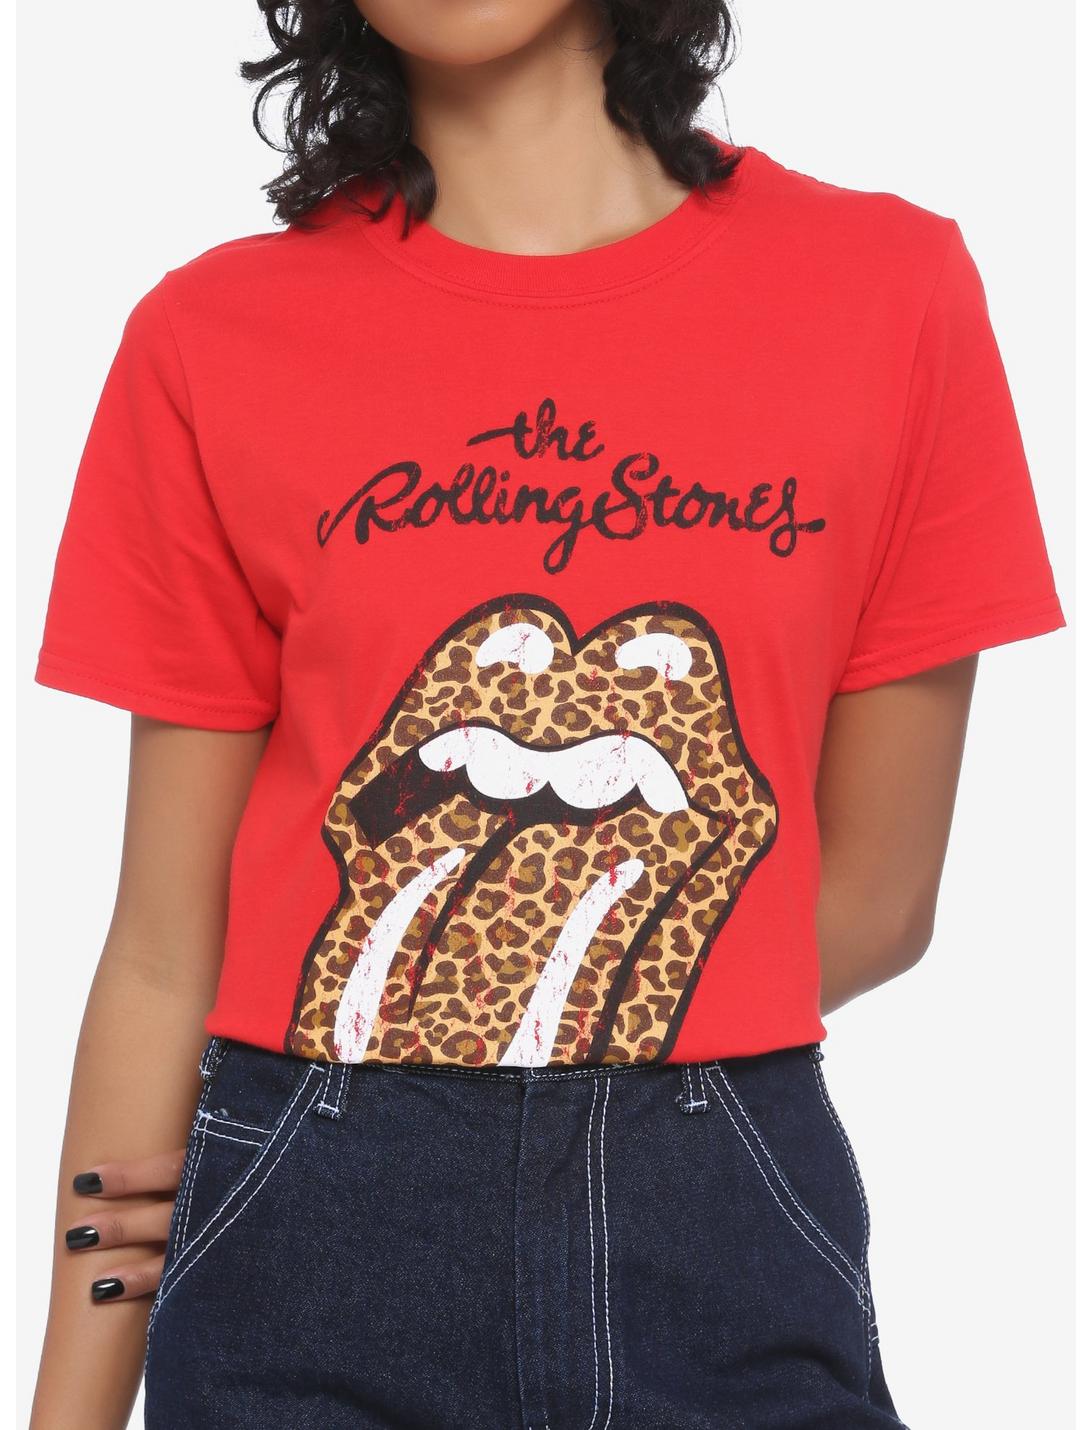 The Rolling Stones Leopard Print Tongue And Lips Girls T-Shirt, RED, hi-res